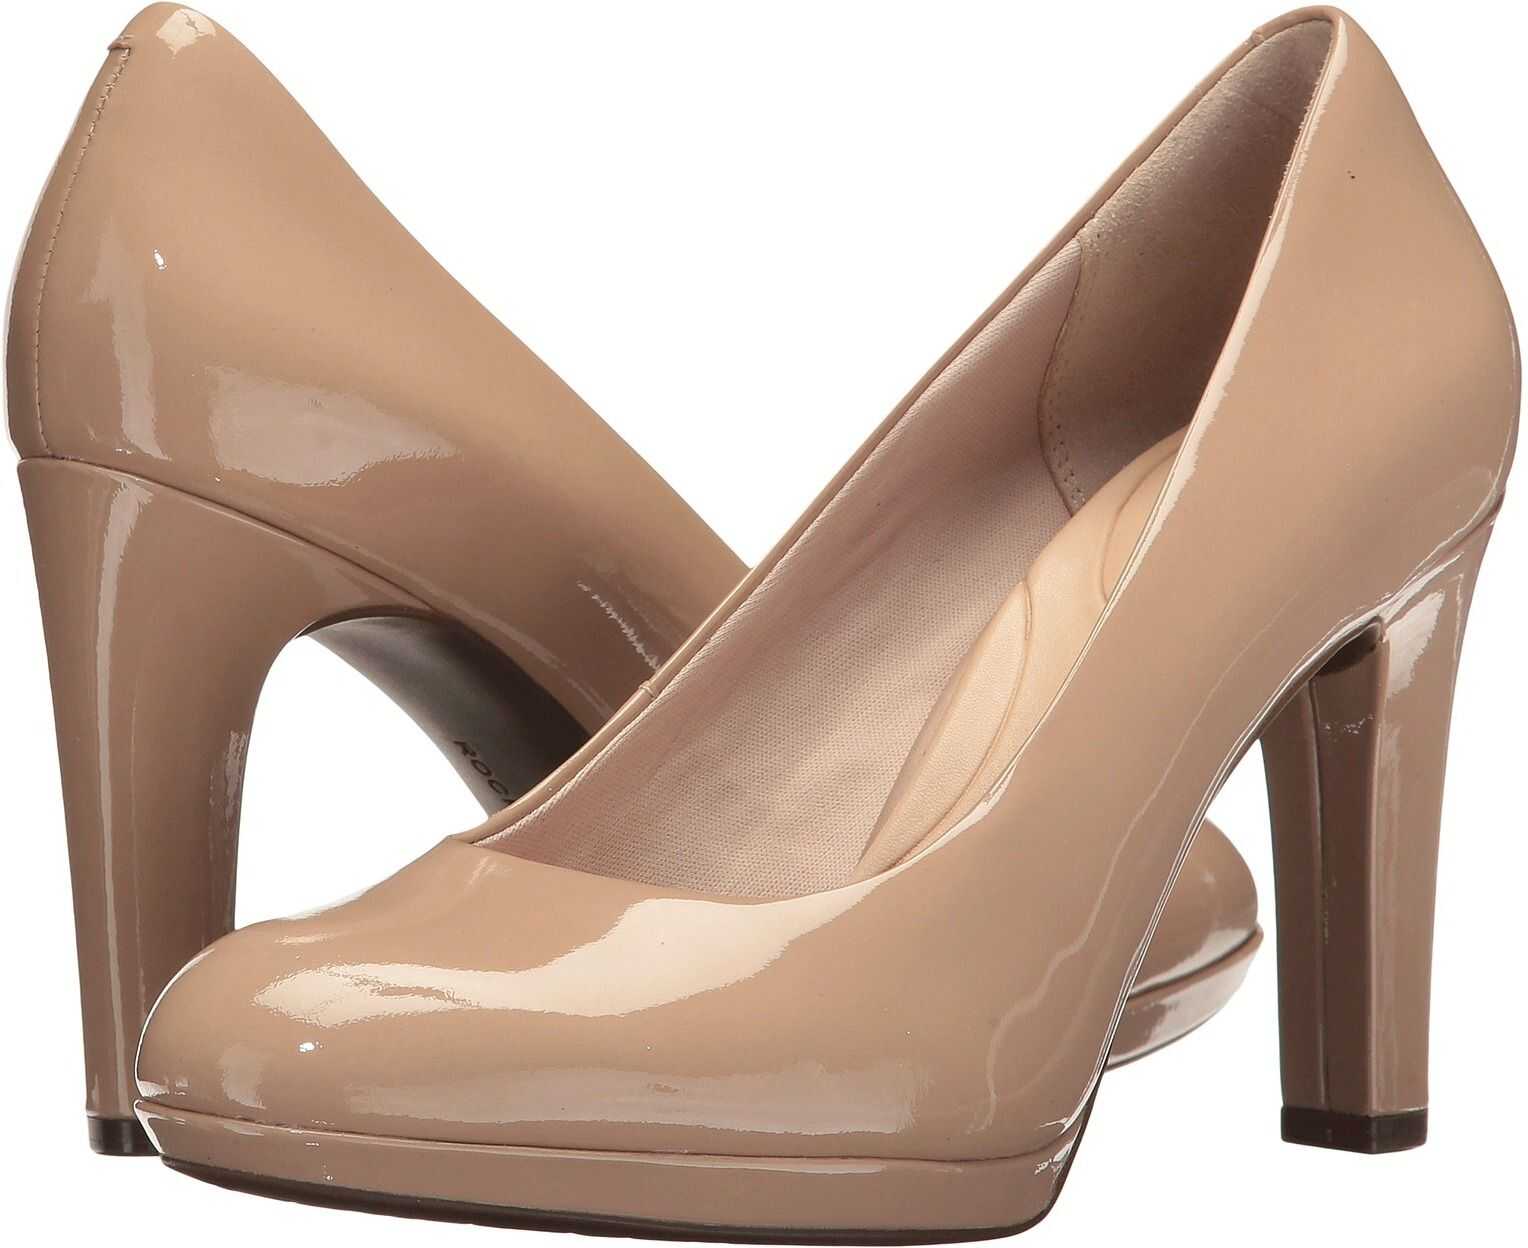 Rockport Seven To 7 Ally Plain Pump Dark Taupe